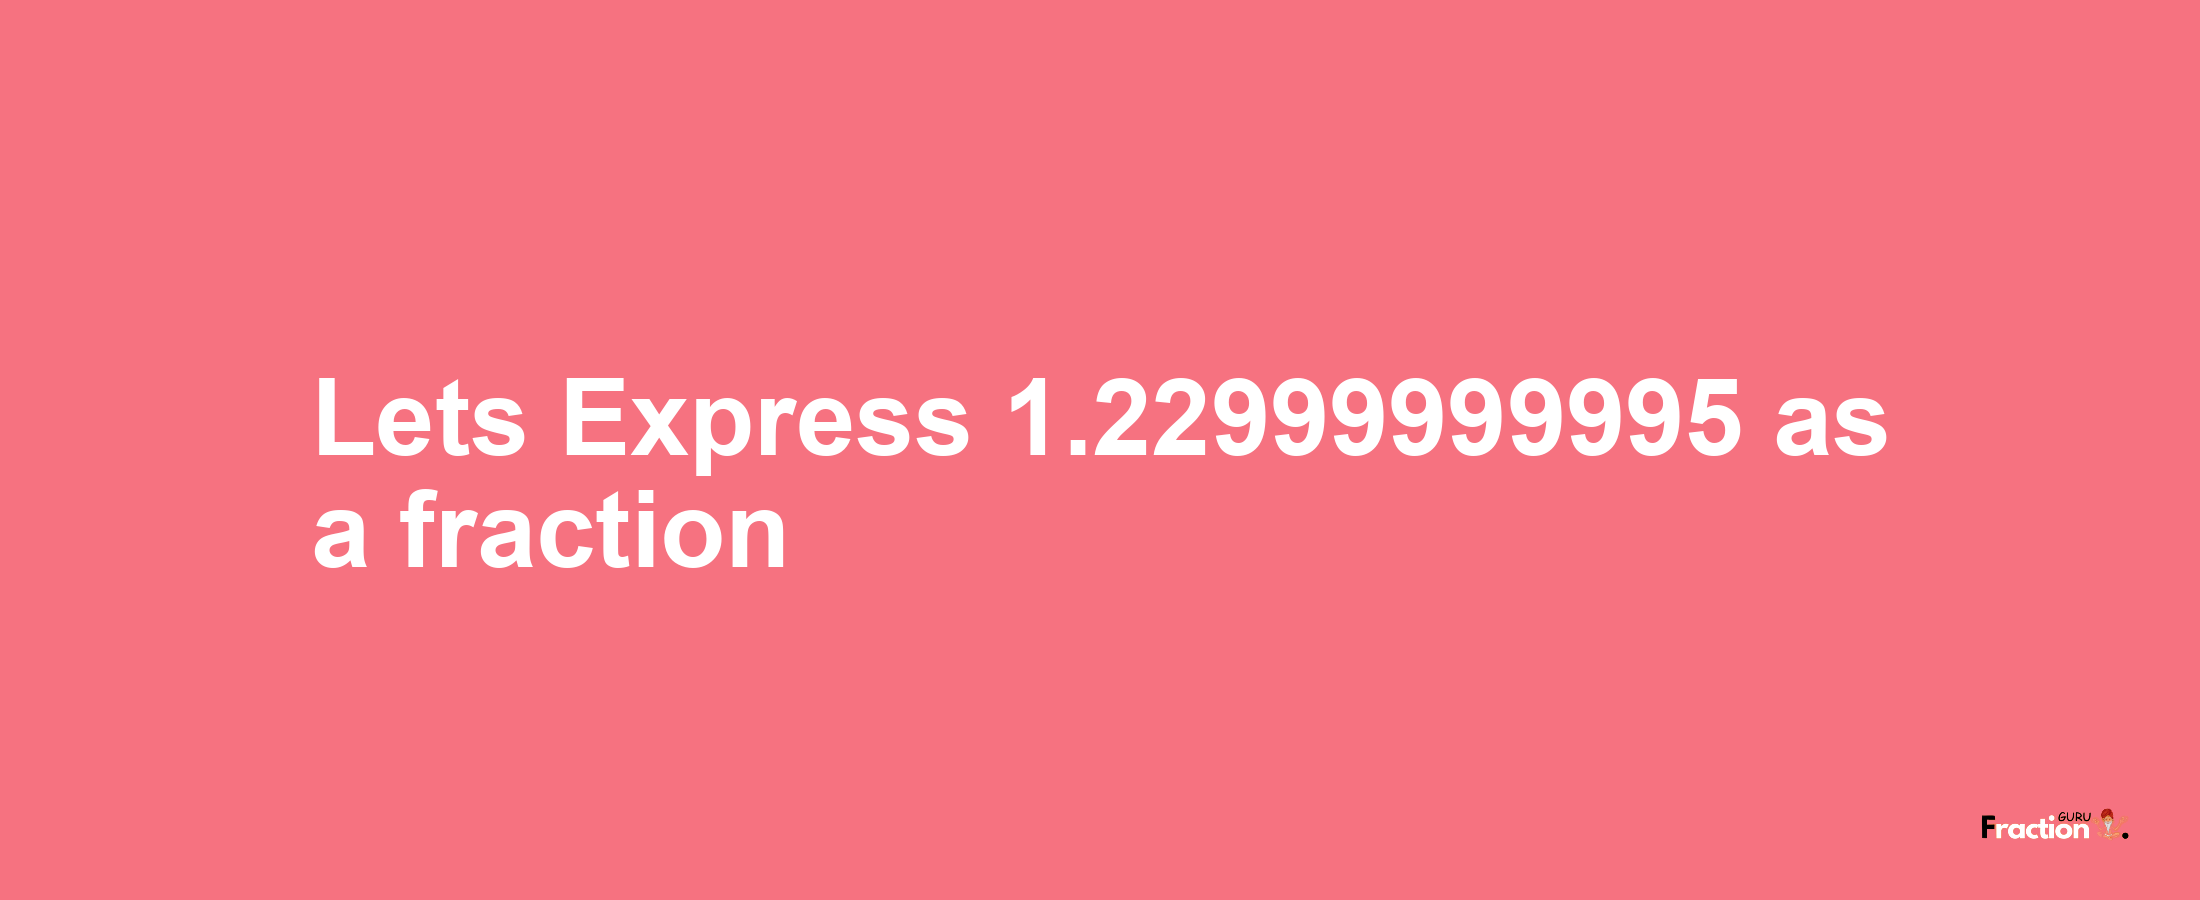 Lets Express 1.22999999995 as afraction